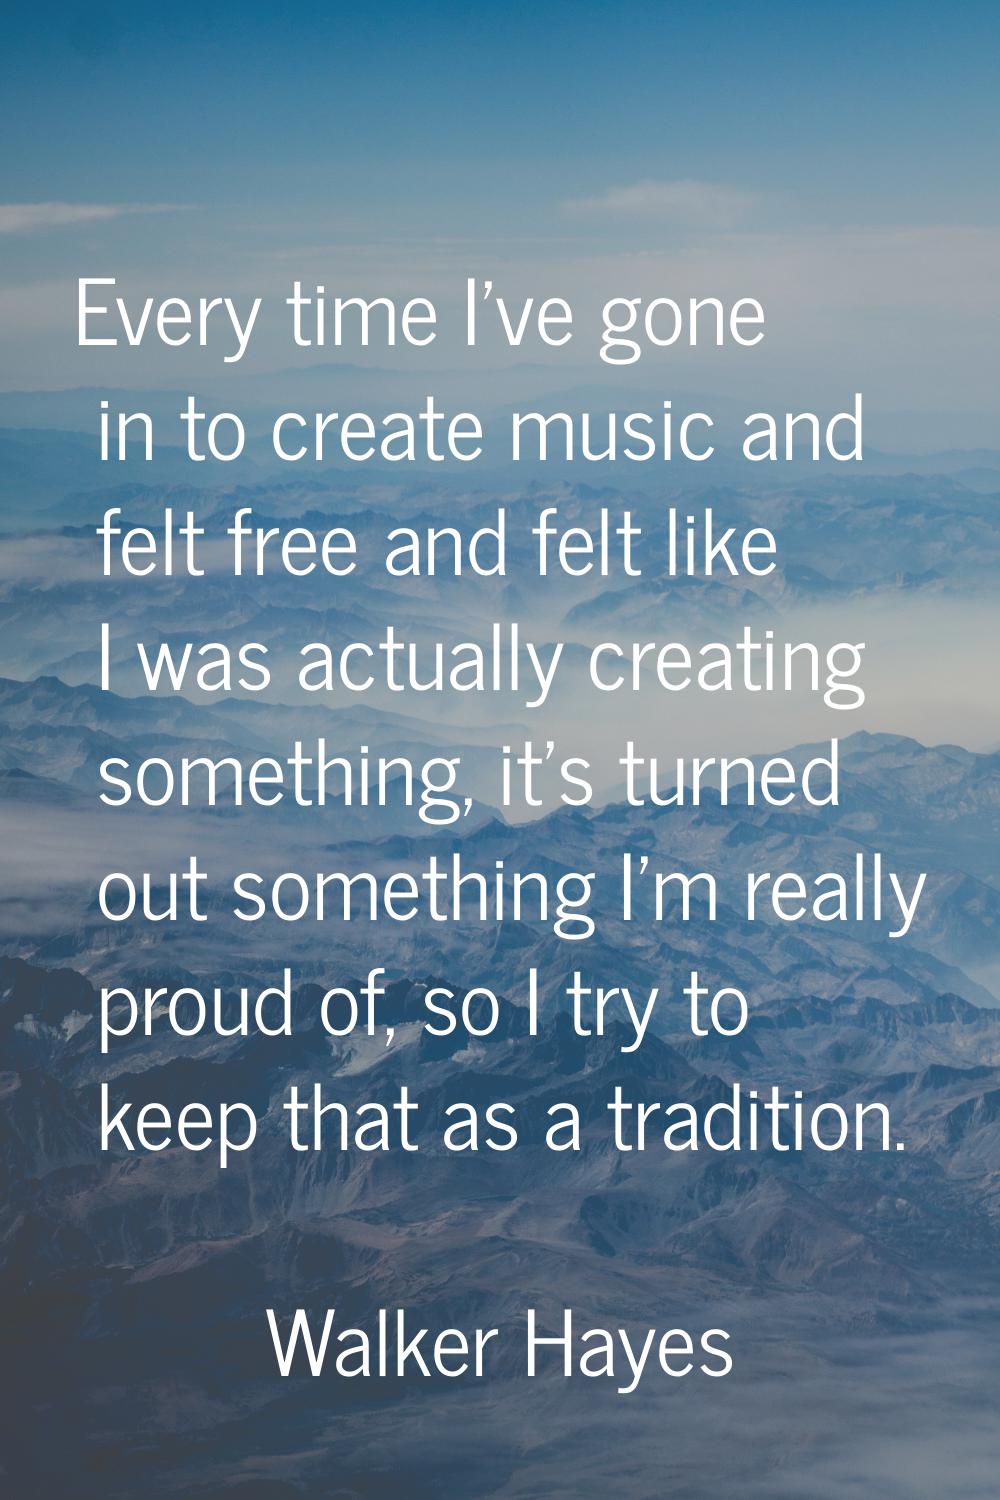 Every time I've gone in to create music and felt free and felt like I was actually creating somethi